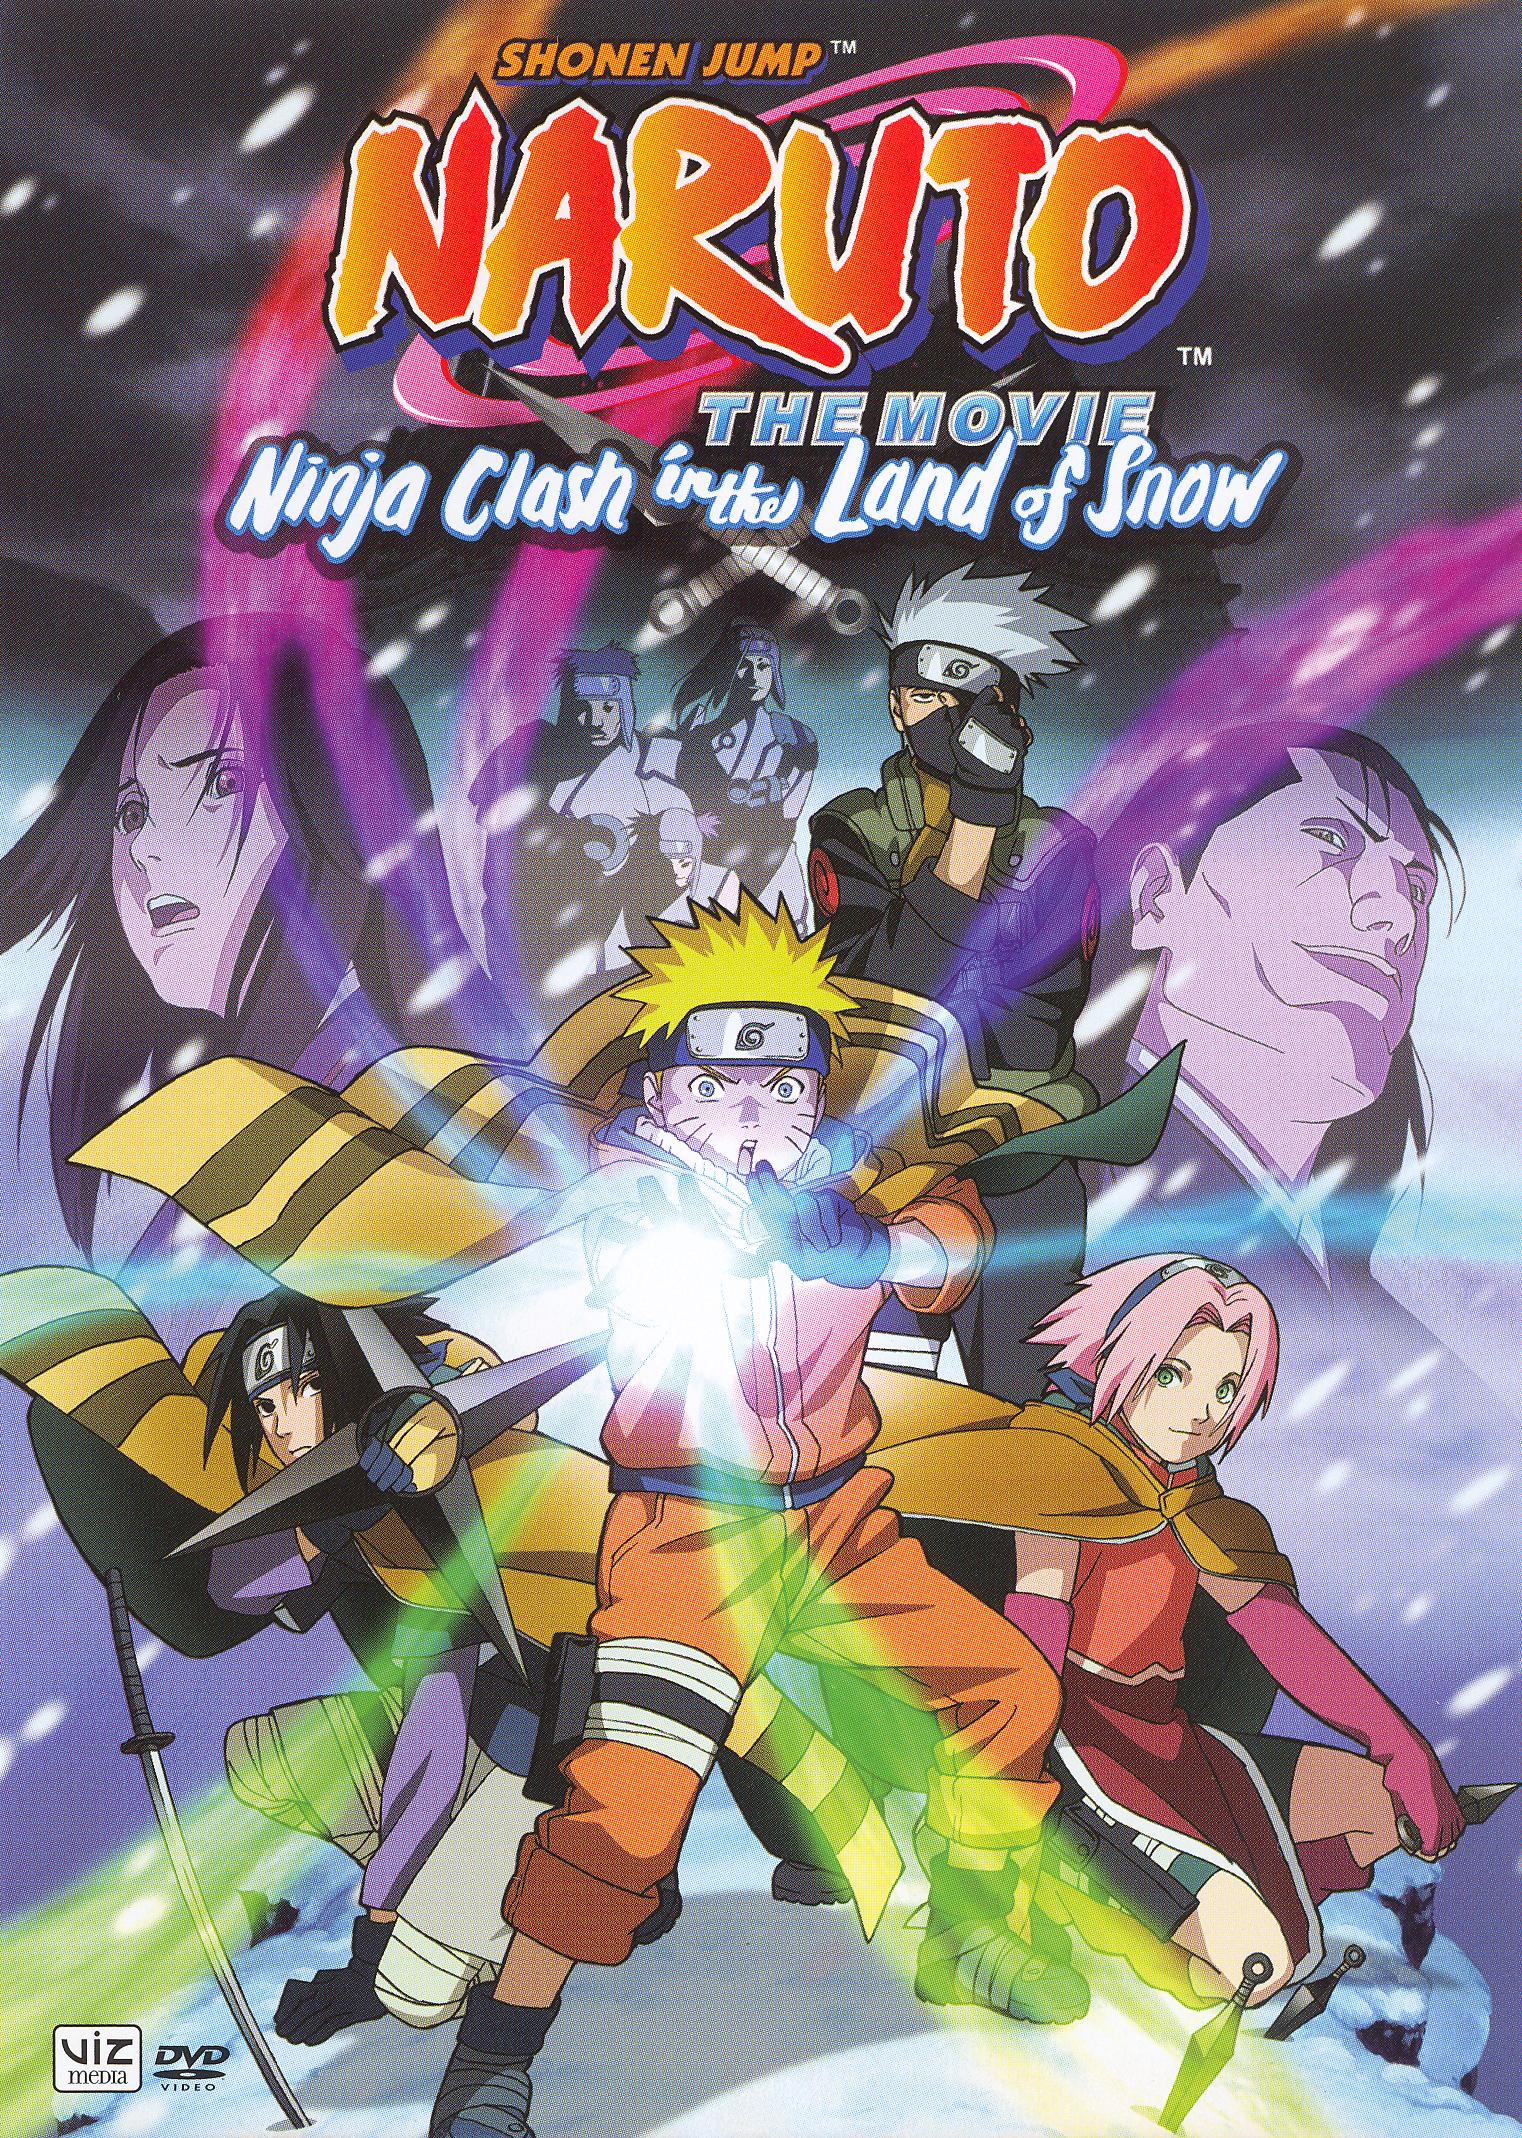 naruto the movie: ninja clash in the land of snow english subbed online free